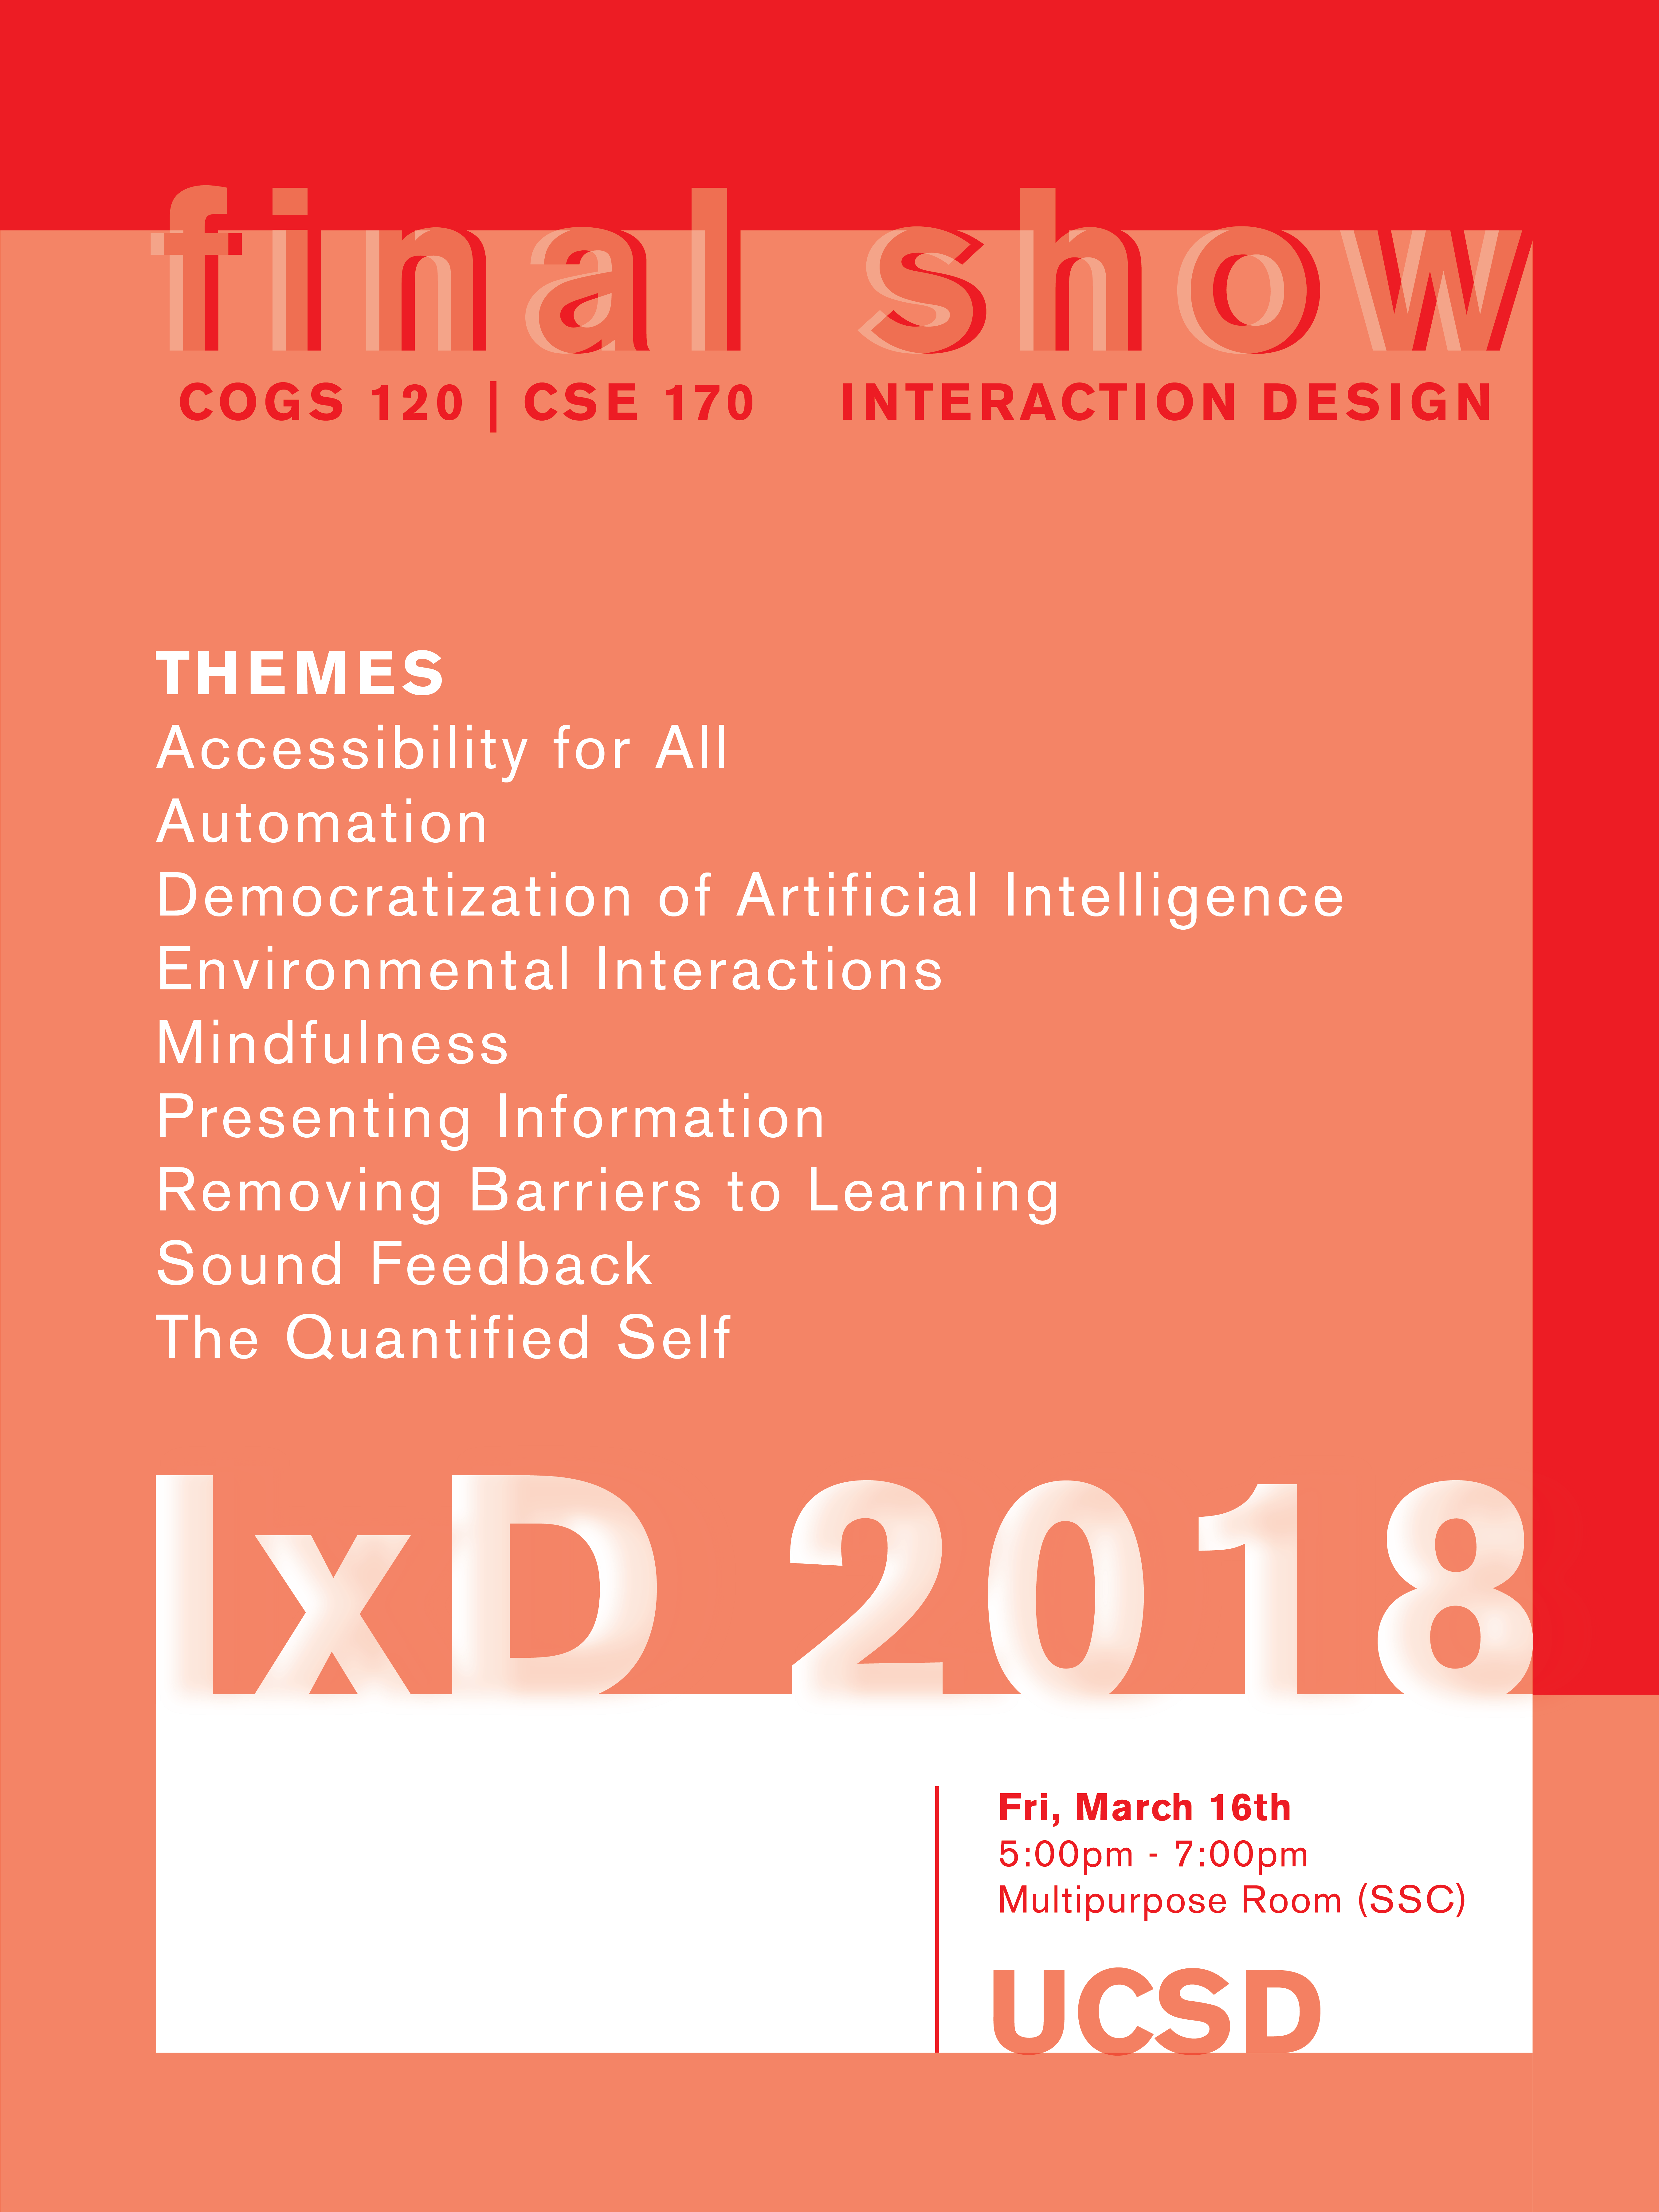 Project themes: Accessibility for All, Automation, Democratization of Artificial Intelligence, Environmental Interactions, Mindfulness, Presenting Information, Removing Barriers to Learning, Sound Feedback, The Quantified Self